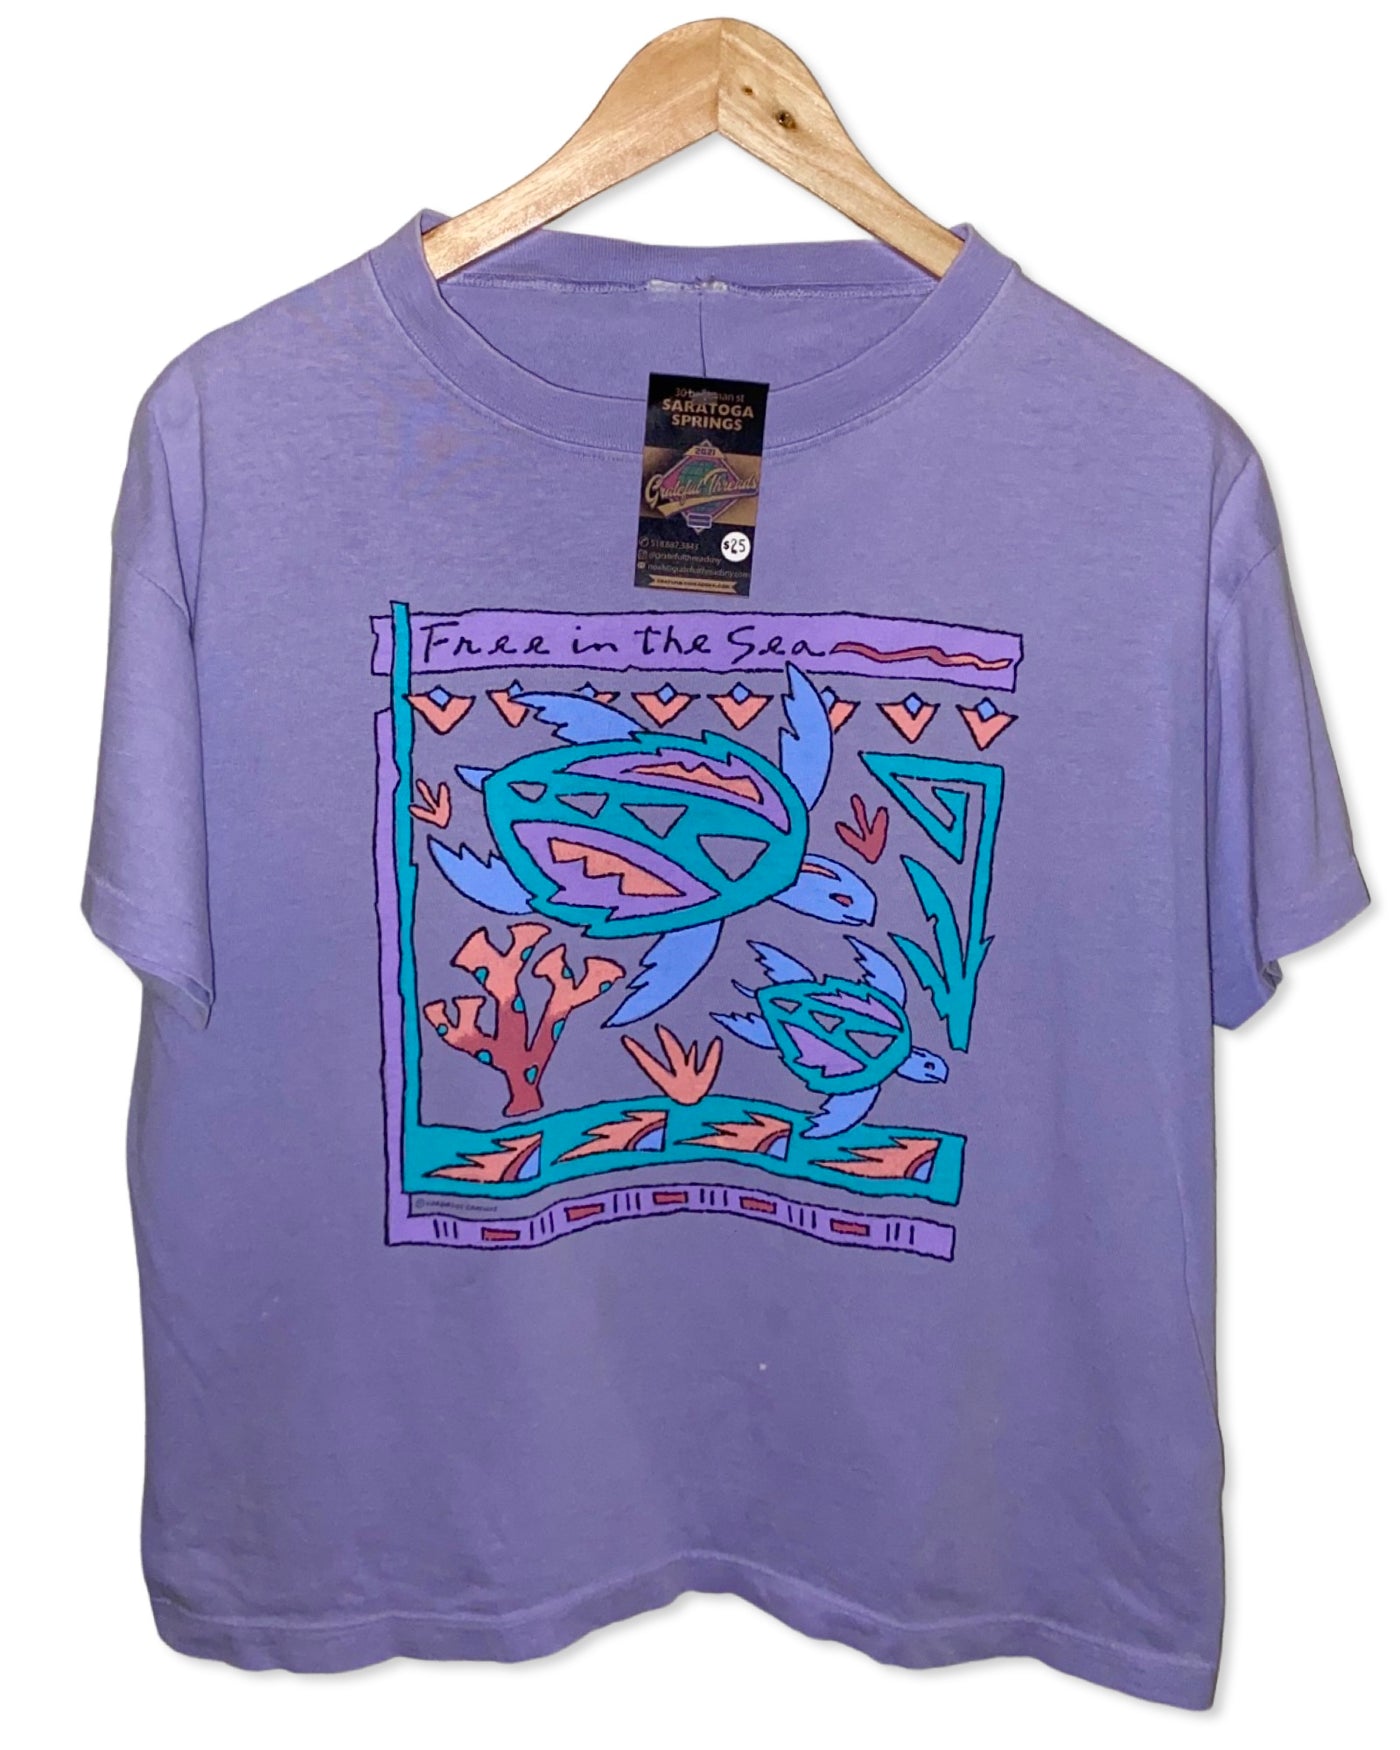 Vintage 80s Free In The Sea Art T-Shirt